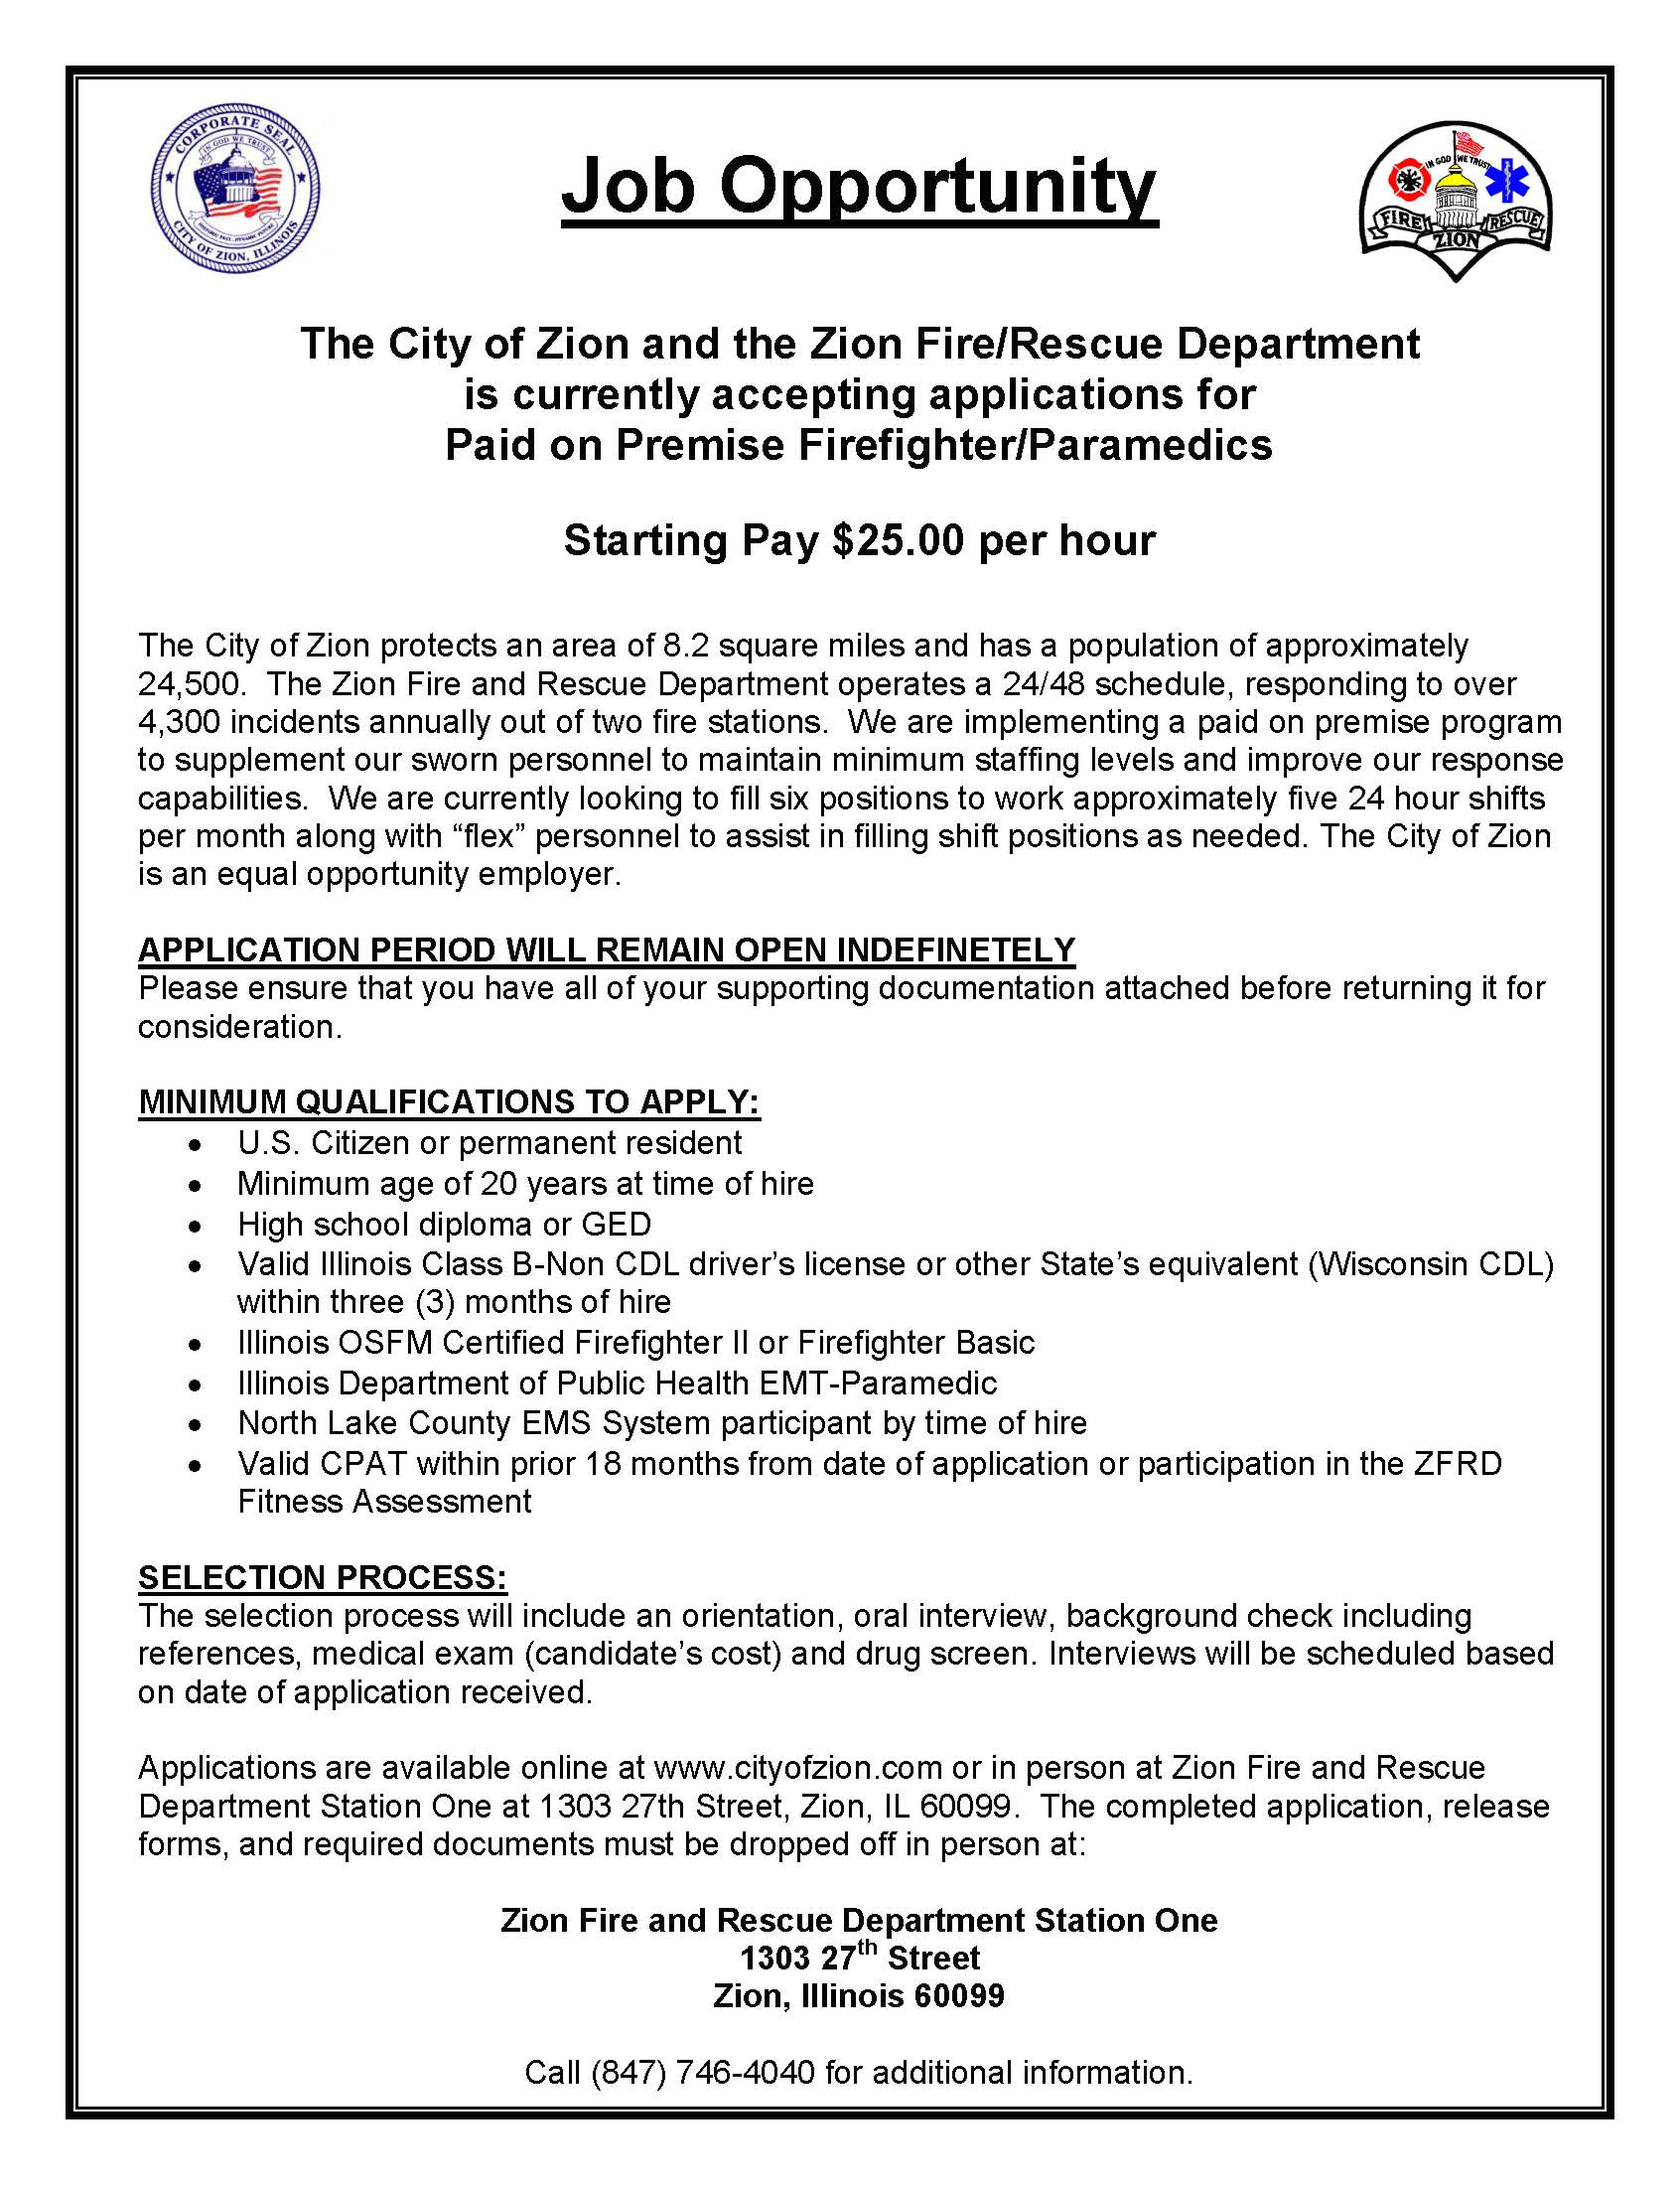 What Kind Of Background Check is Done for Green Card Fire Department Employment City Of Zion